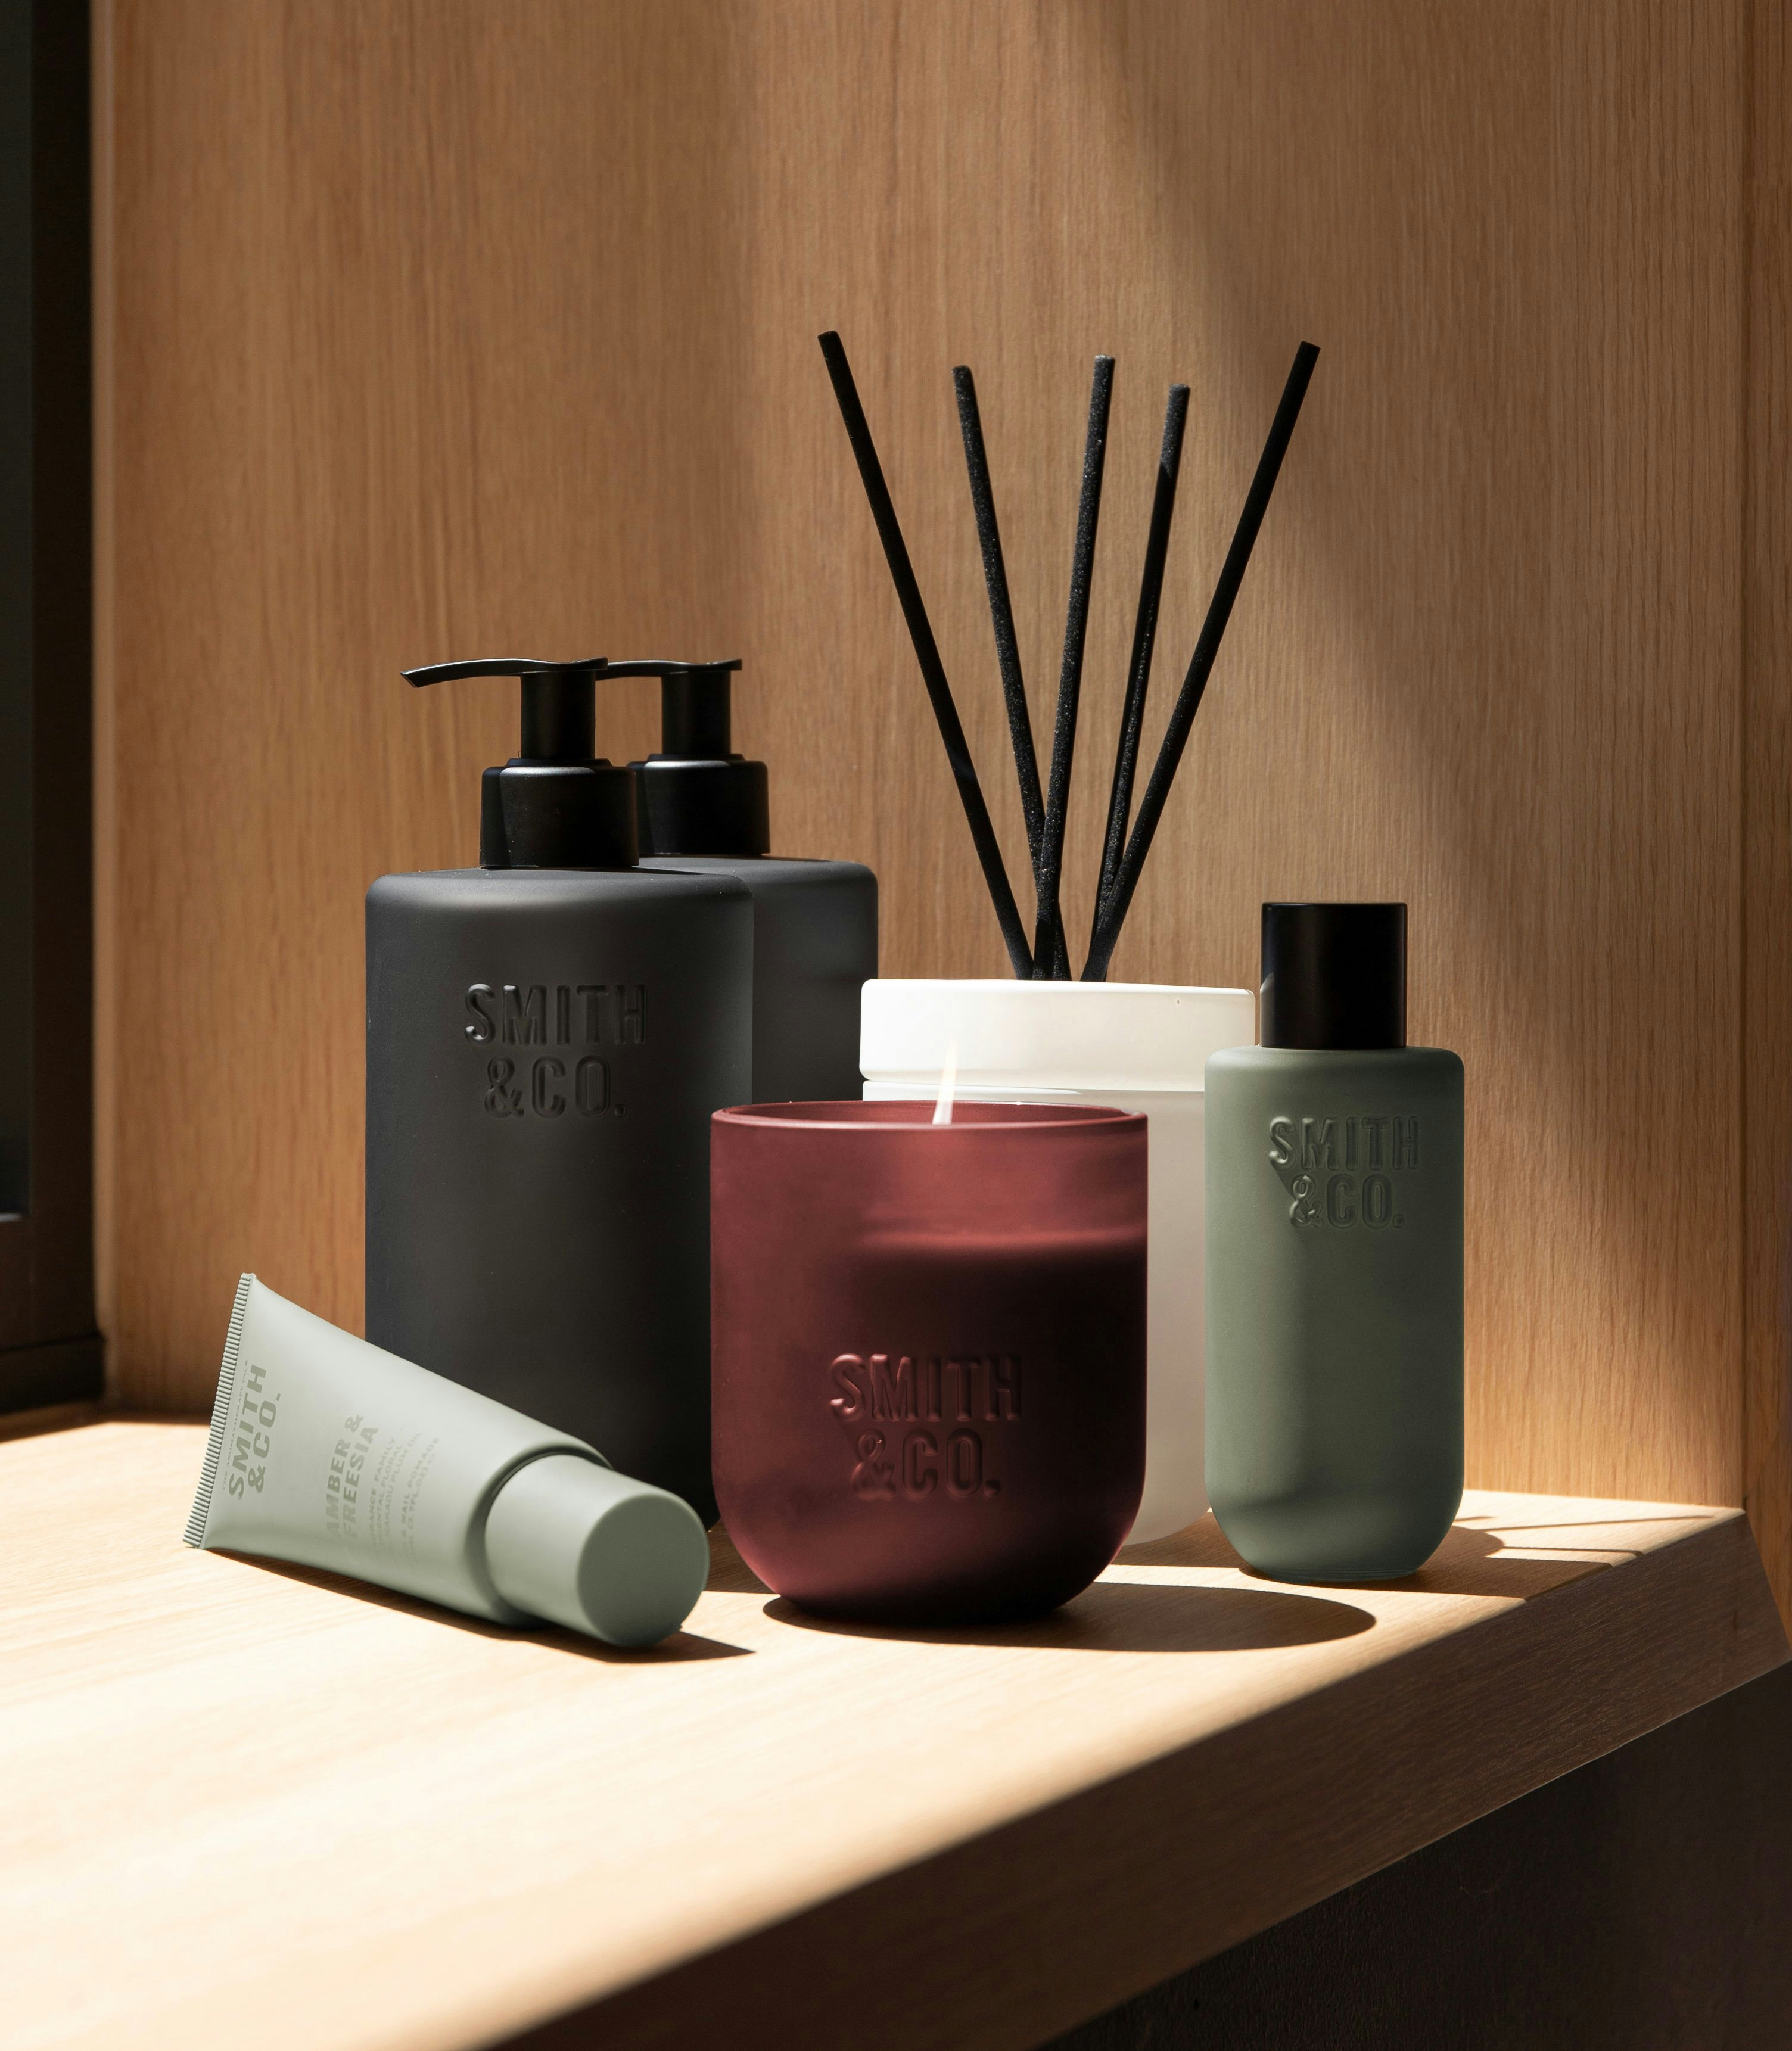 Where home decor meets home fragrance. The iconic Smith & Co. range has been reinvented with a new look and new aromas.